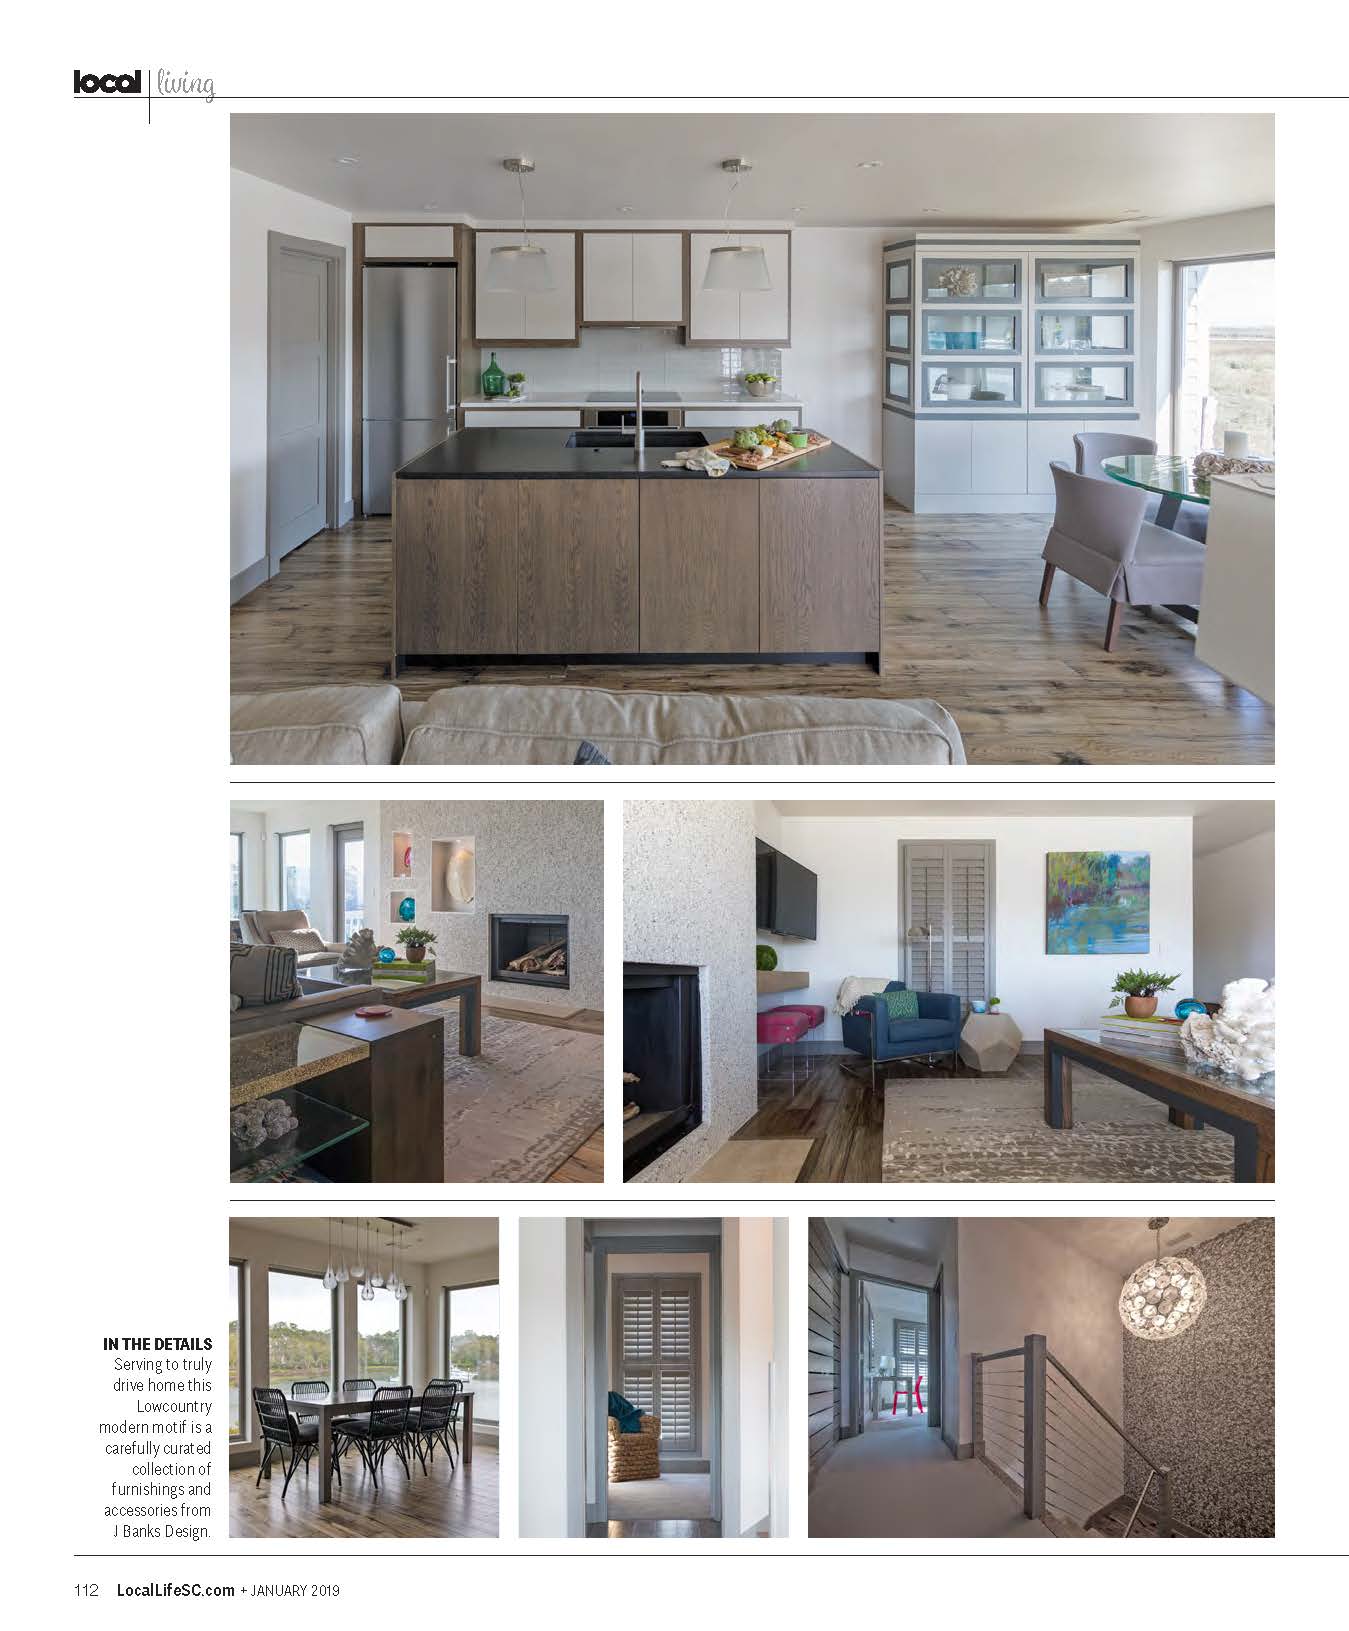 Local Life magazine features a Hilton Head Vacation Home Renovation by J. Banks Design Group